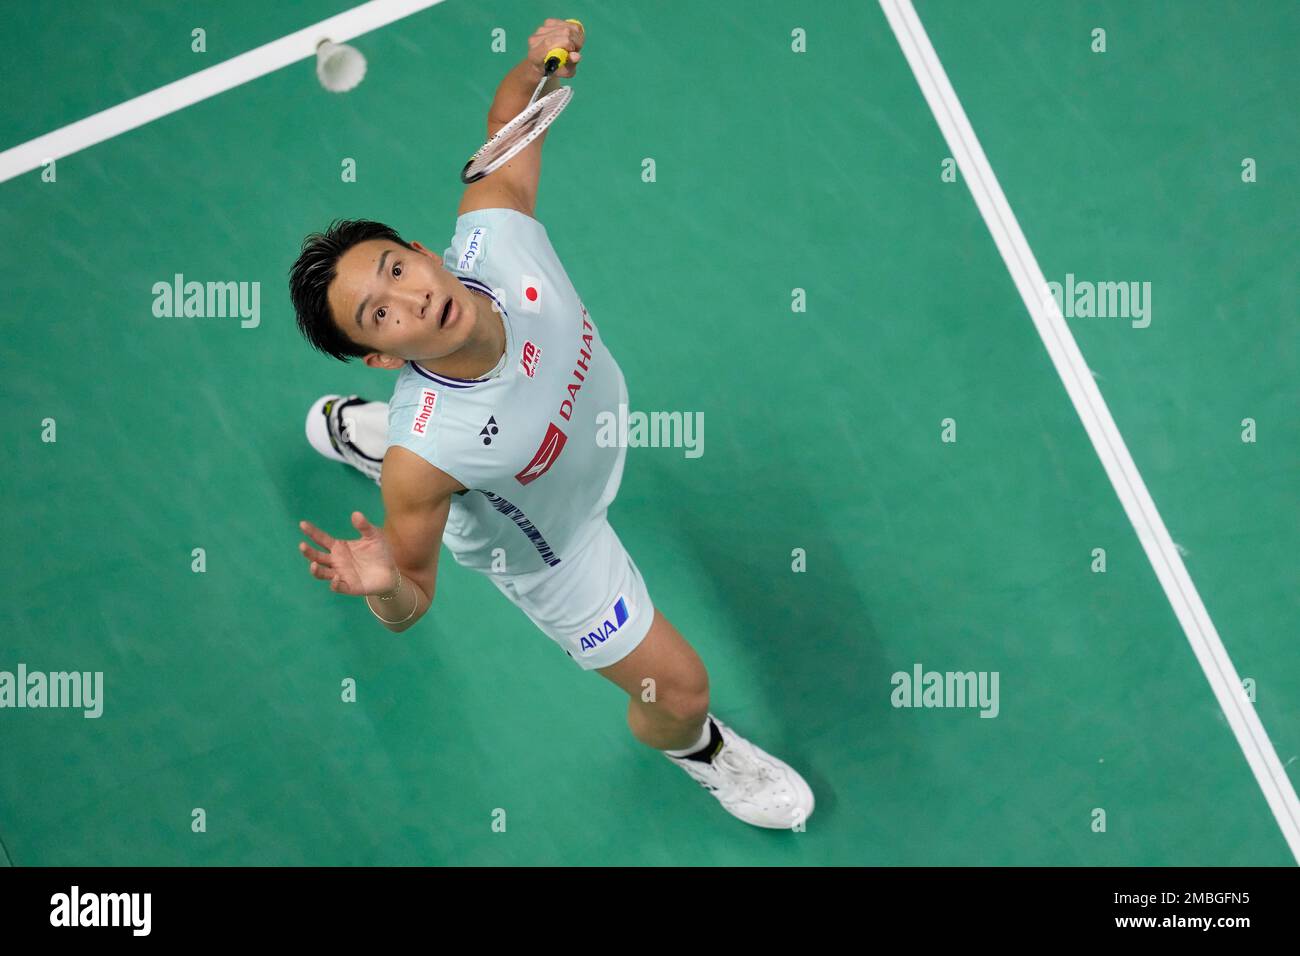 Japans Kento Momota returns a shot to Englands Toby Penty during their mens singles qualifying match at Thomas and Uber Cup in Bangkok, Thailand, Tuesday, May 10, 2022